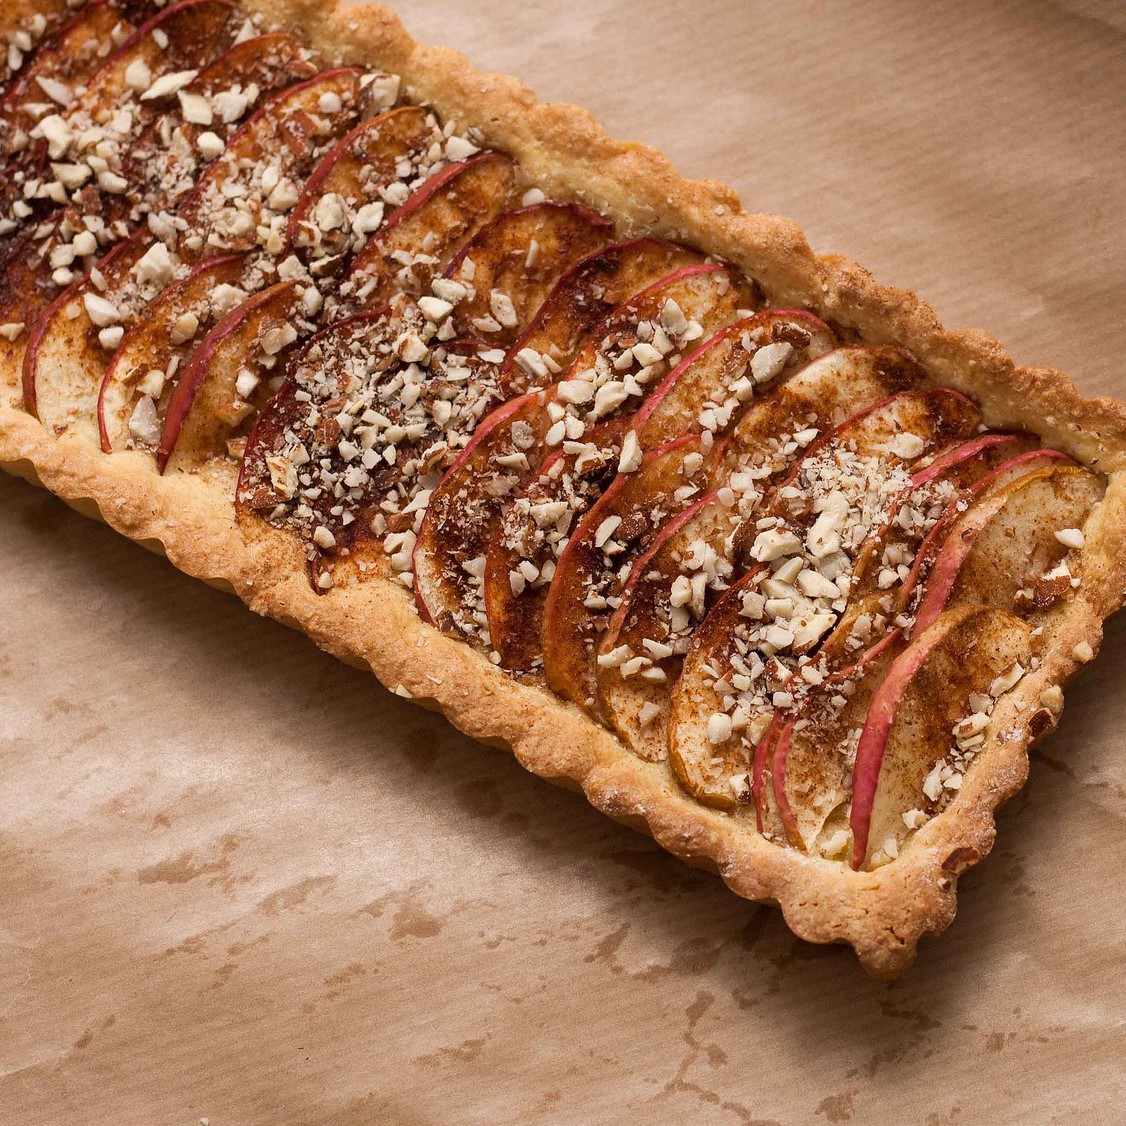 Recipe for Nordic Apple Pie with Marzipan, almonds and cinnamon